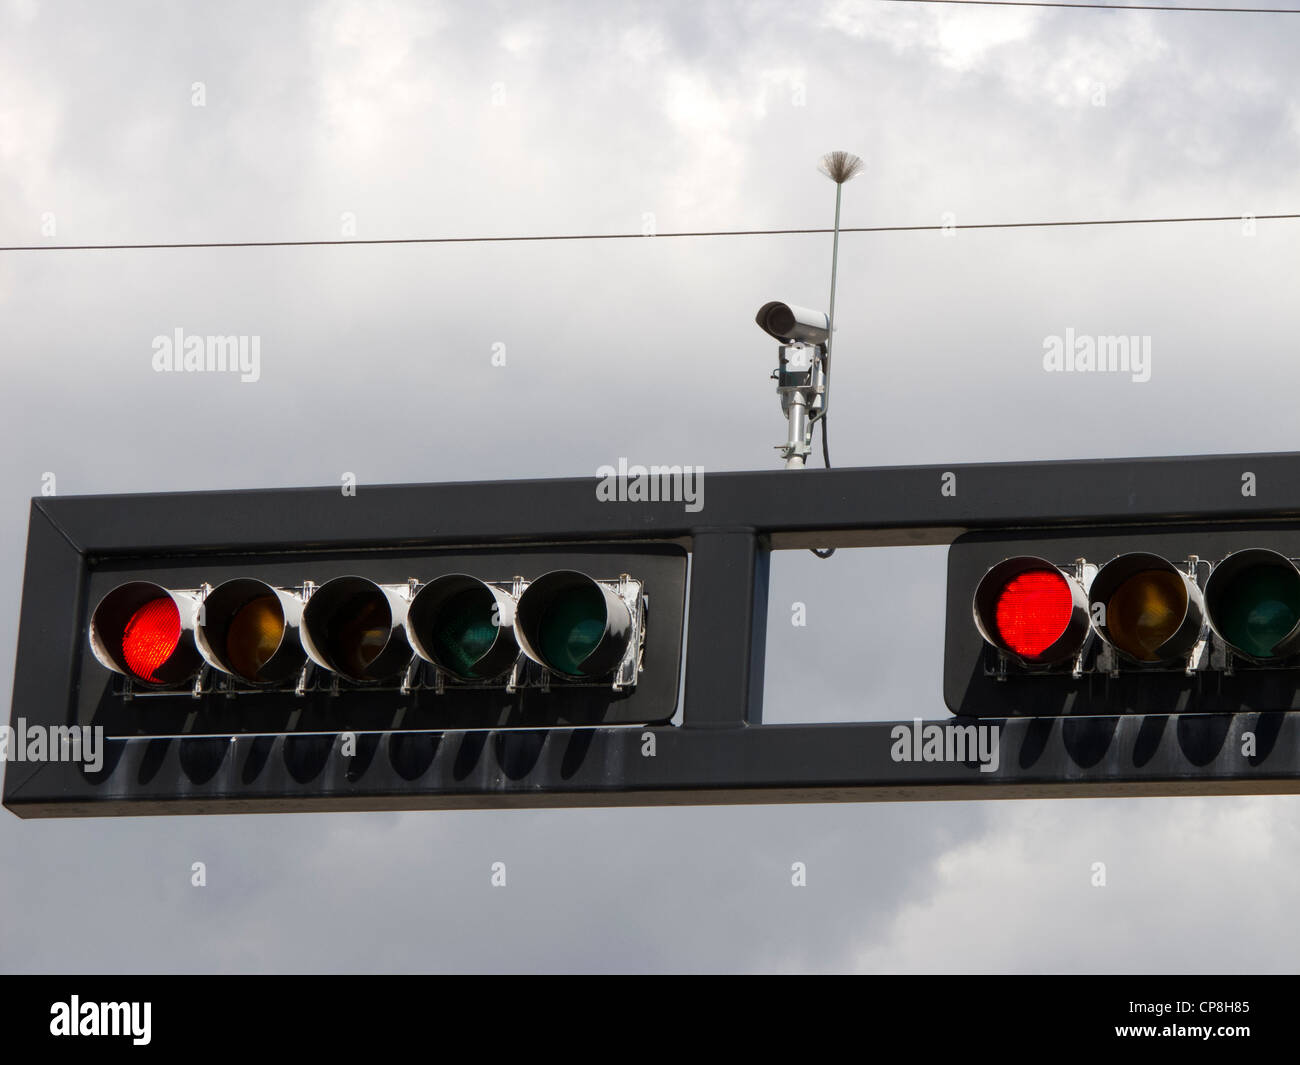 Red light and camera. Stock Photo